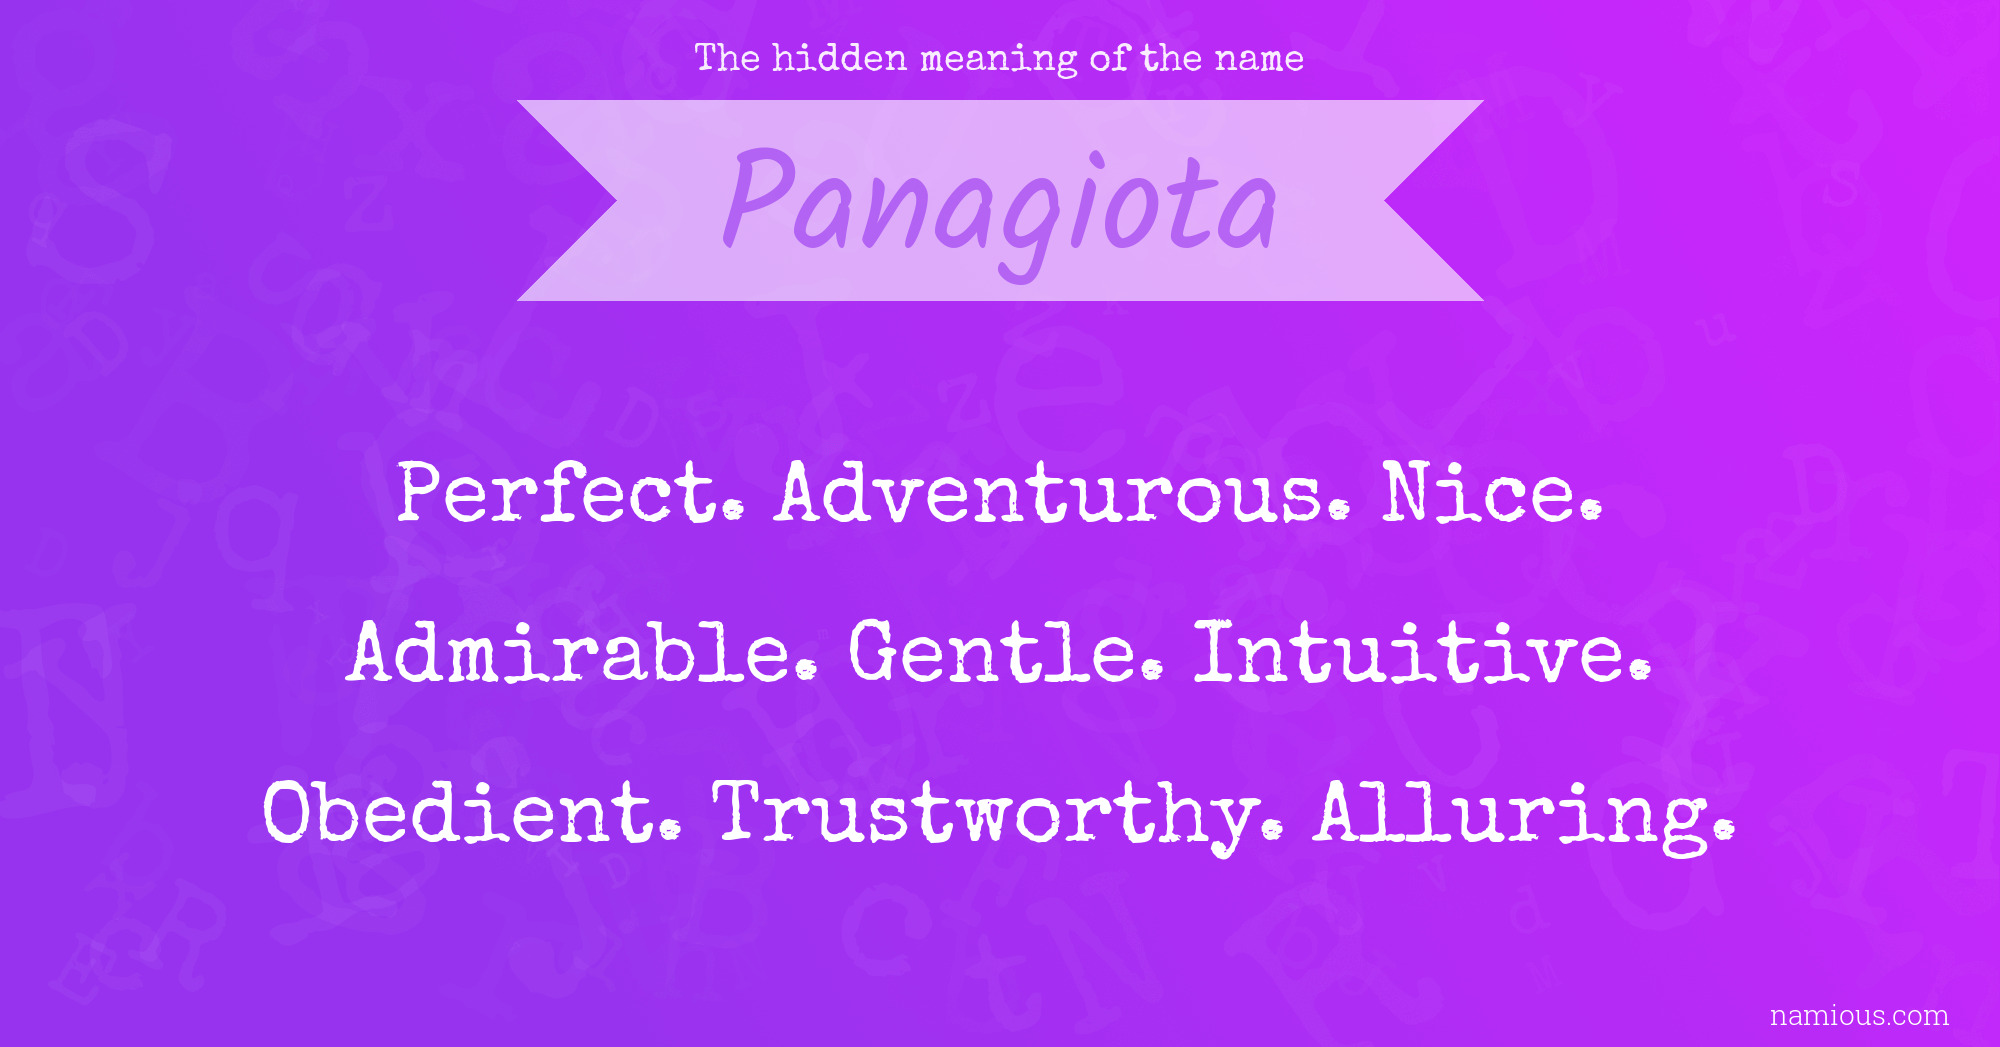 The hidden meaning of the name Panagiota